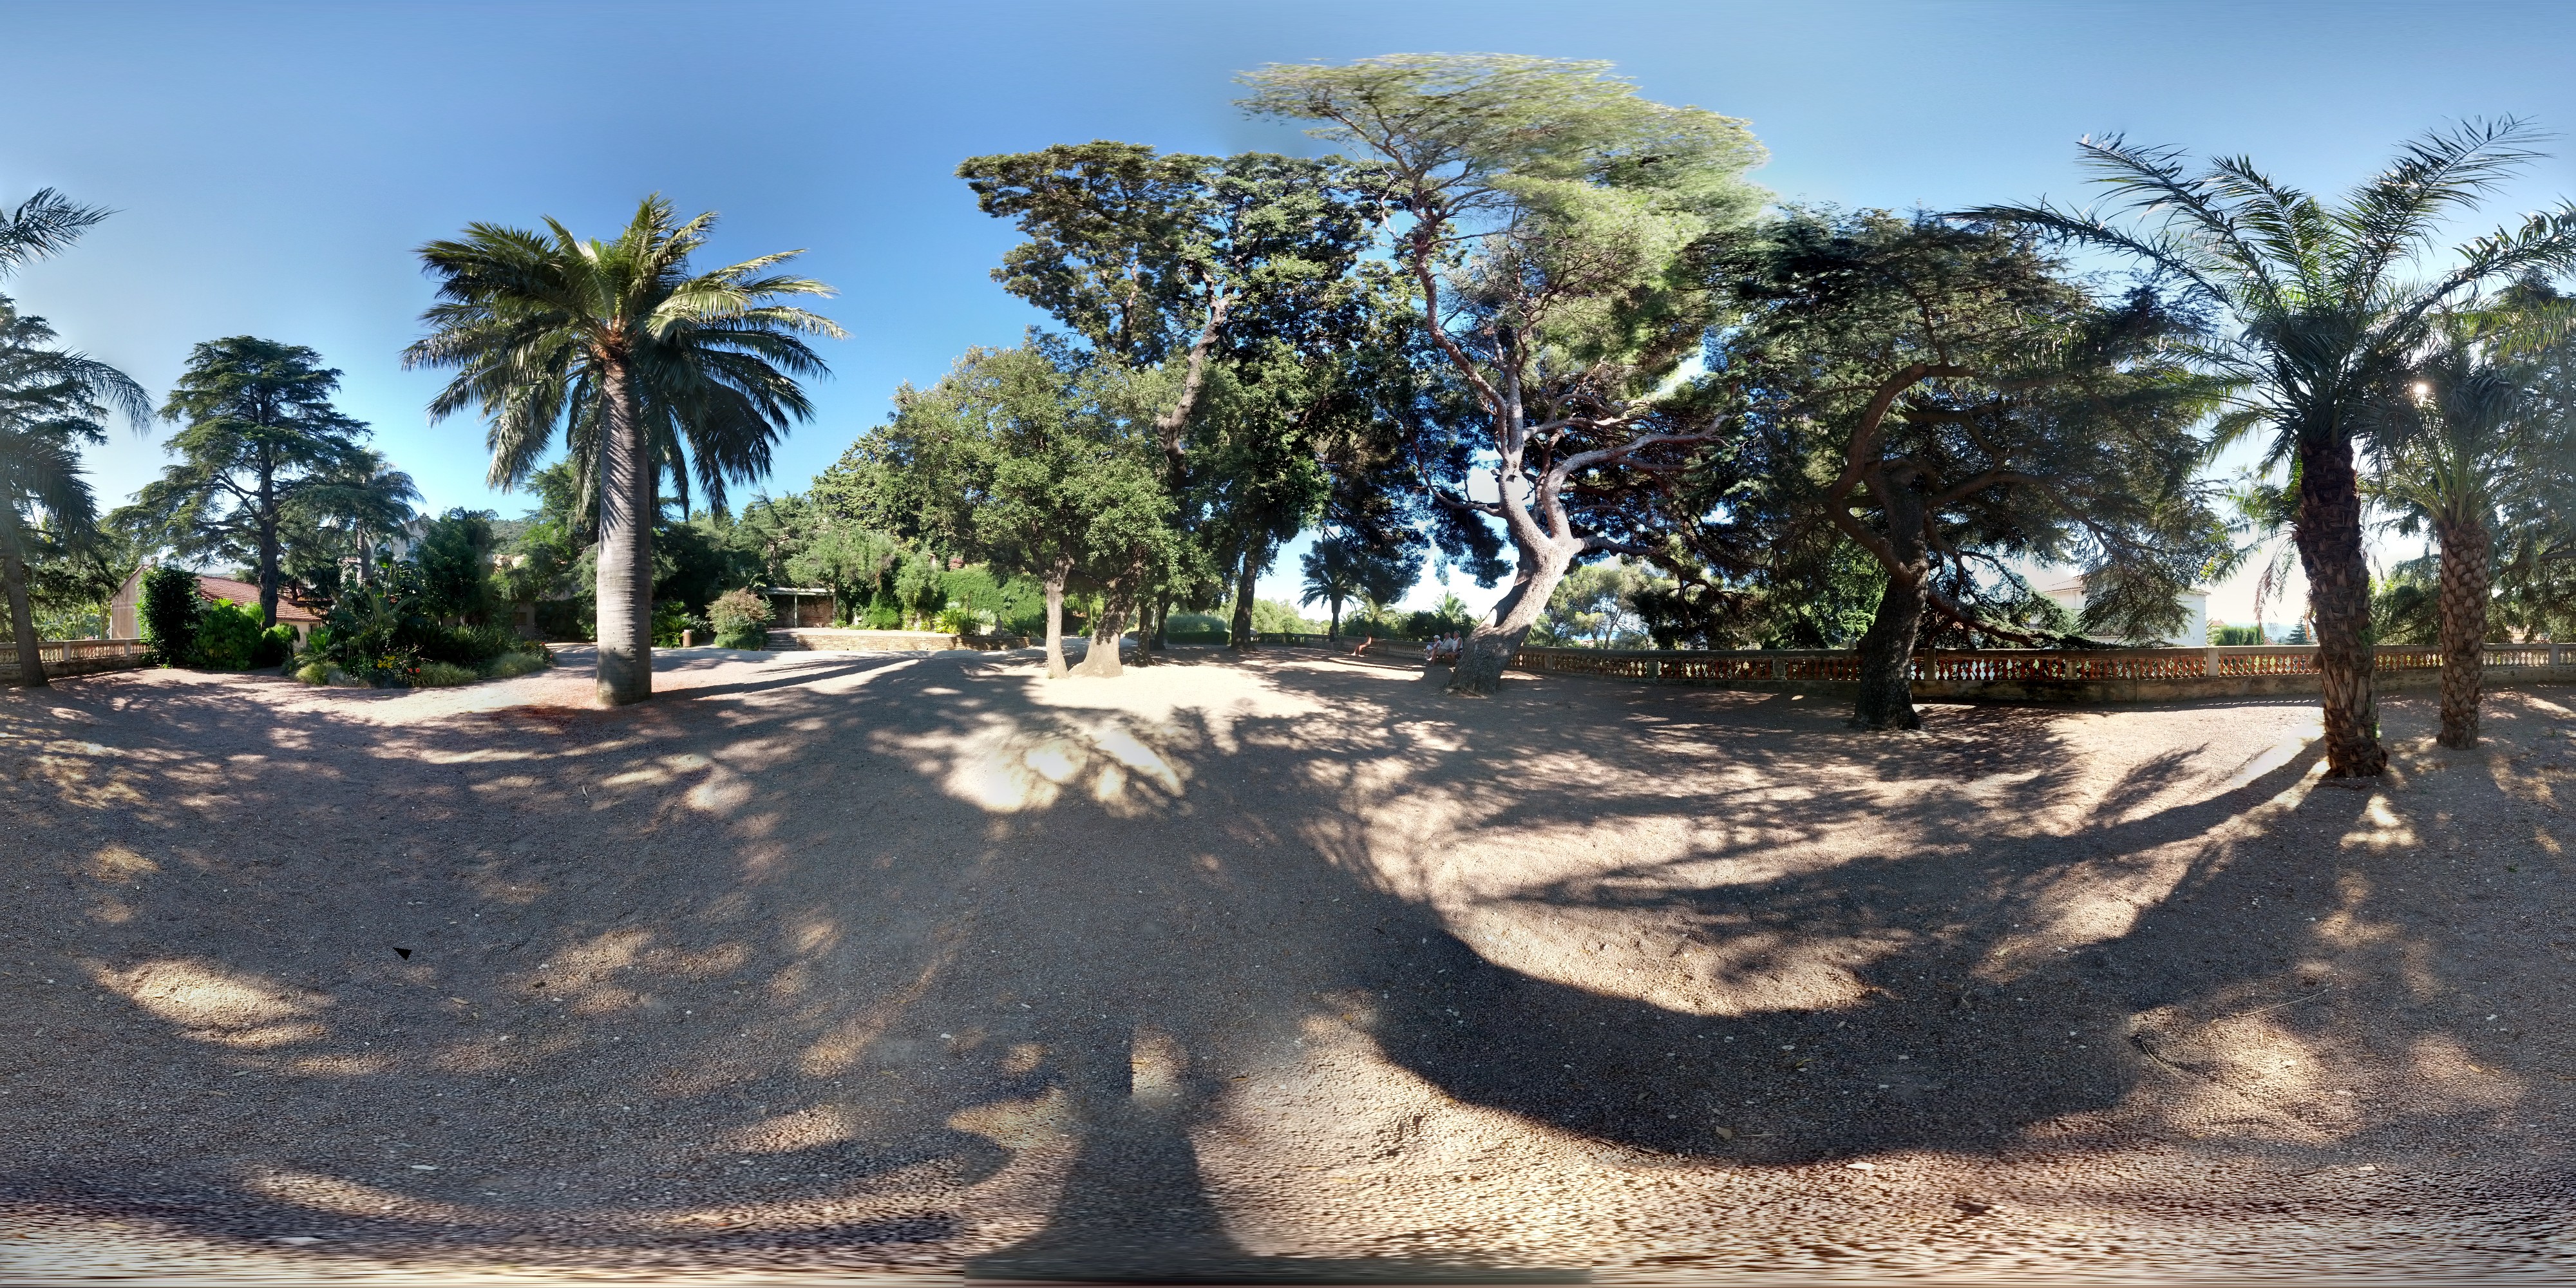 ricoh theta test picture 11